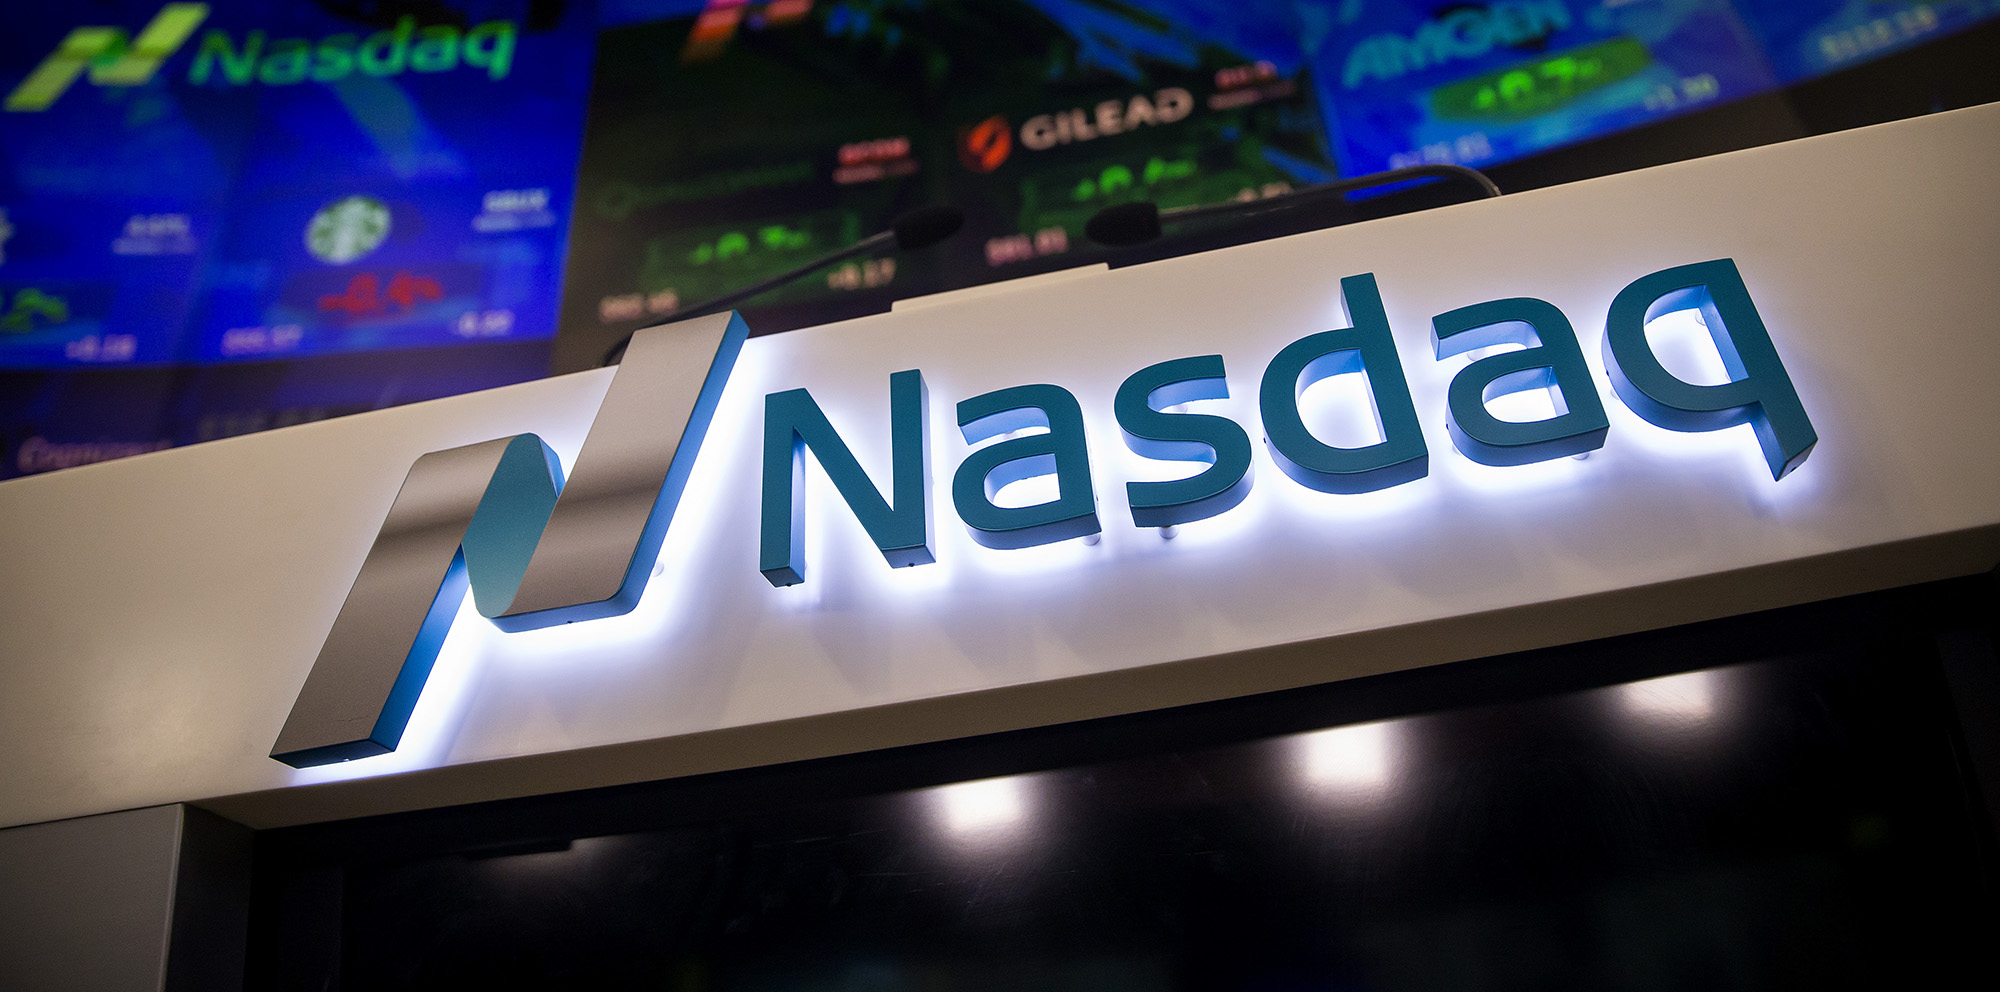 Einar Aas, a private trader and one of  Norway’s richest men, suffered 114 million euros&nbsp;($132.6 million) of losses on energy-futures positions traded on Nasdaq.